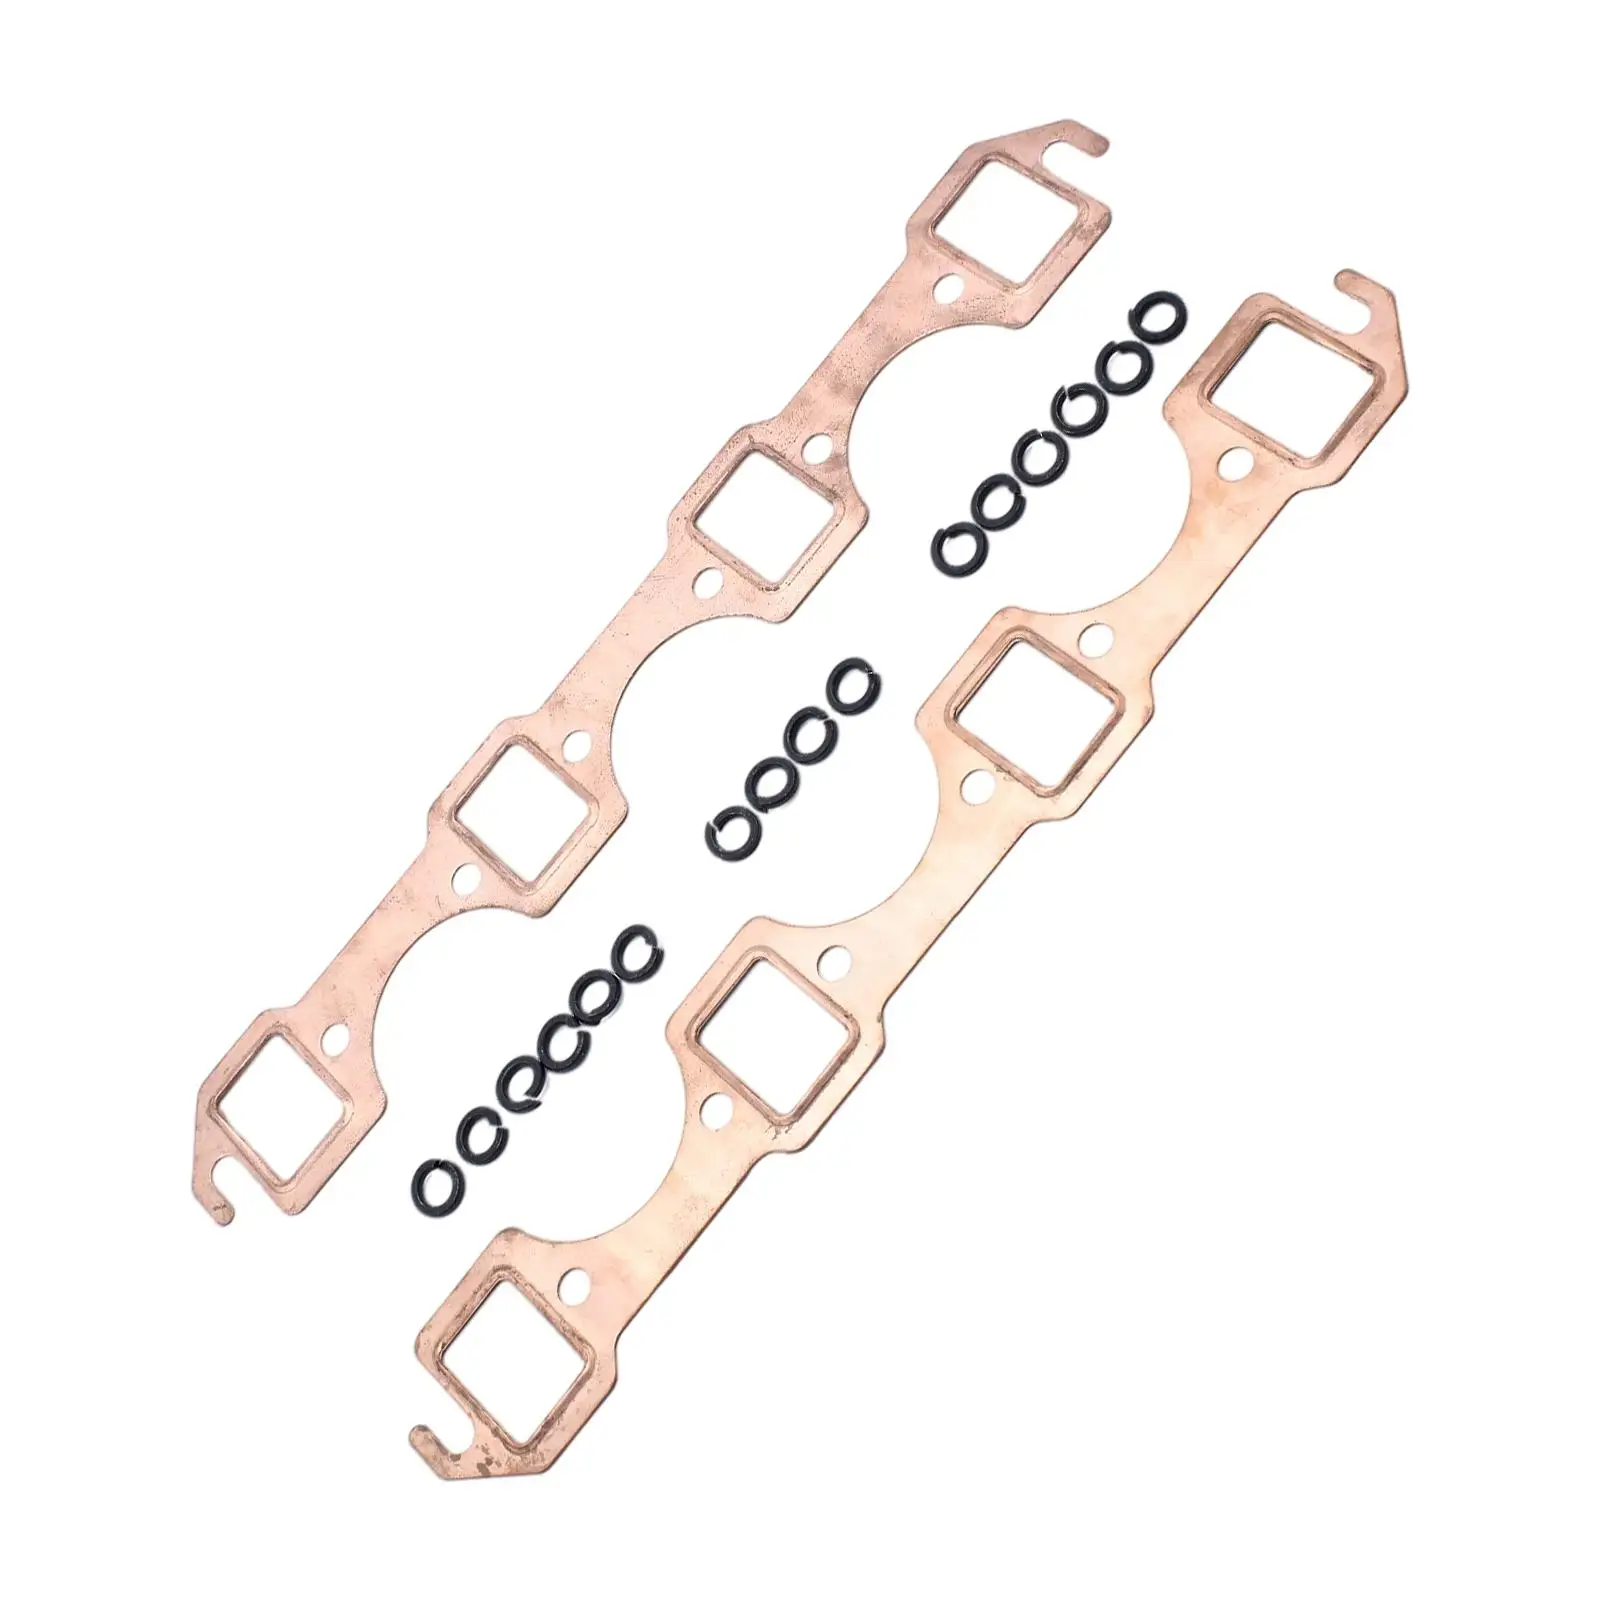 2Pcs Exhaust Header Gaskets Square Small Block Port Gasket Copper Reusable Fit for Ford 302 5.0L 351W 5.8L 260 4.3L 289 4.8L